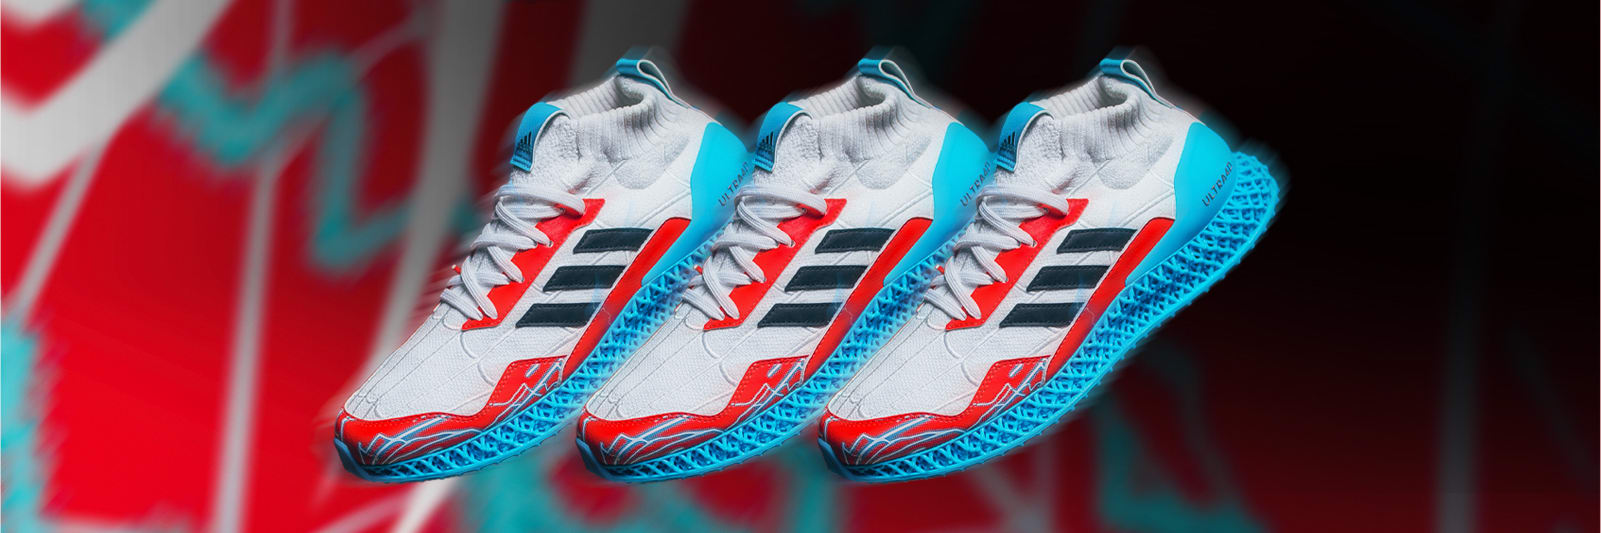 Marvel's Spider-Man 2 adidas Collab: Where Gaming Meets Real-World